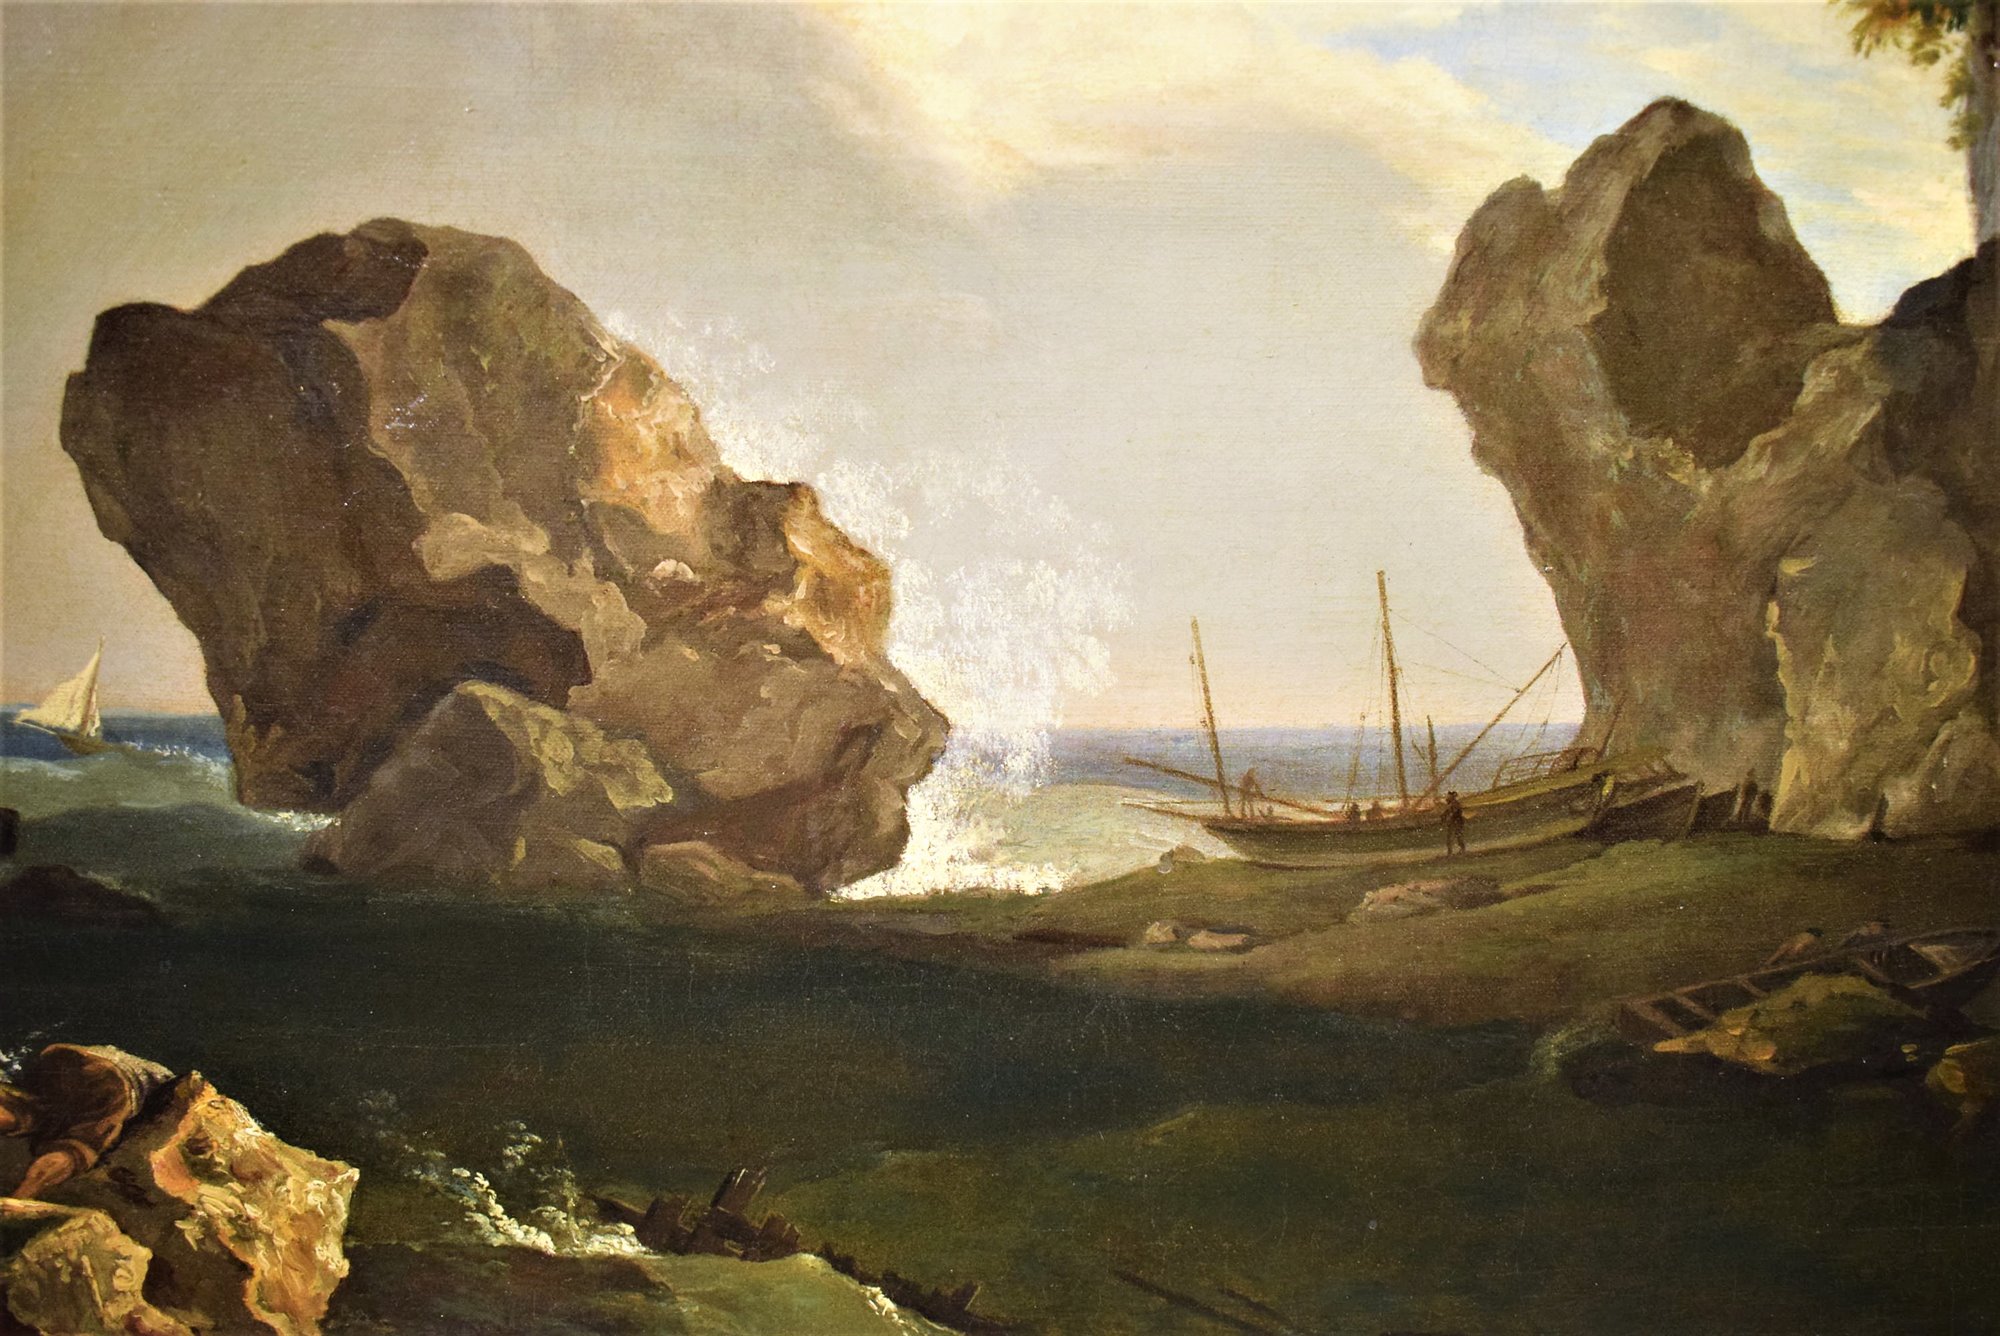 Shipwreck on the cliff